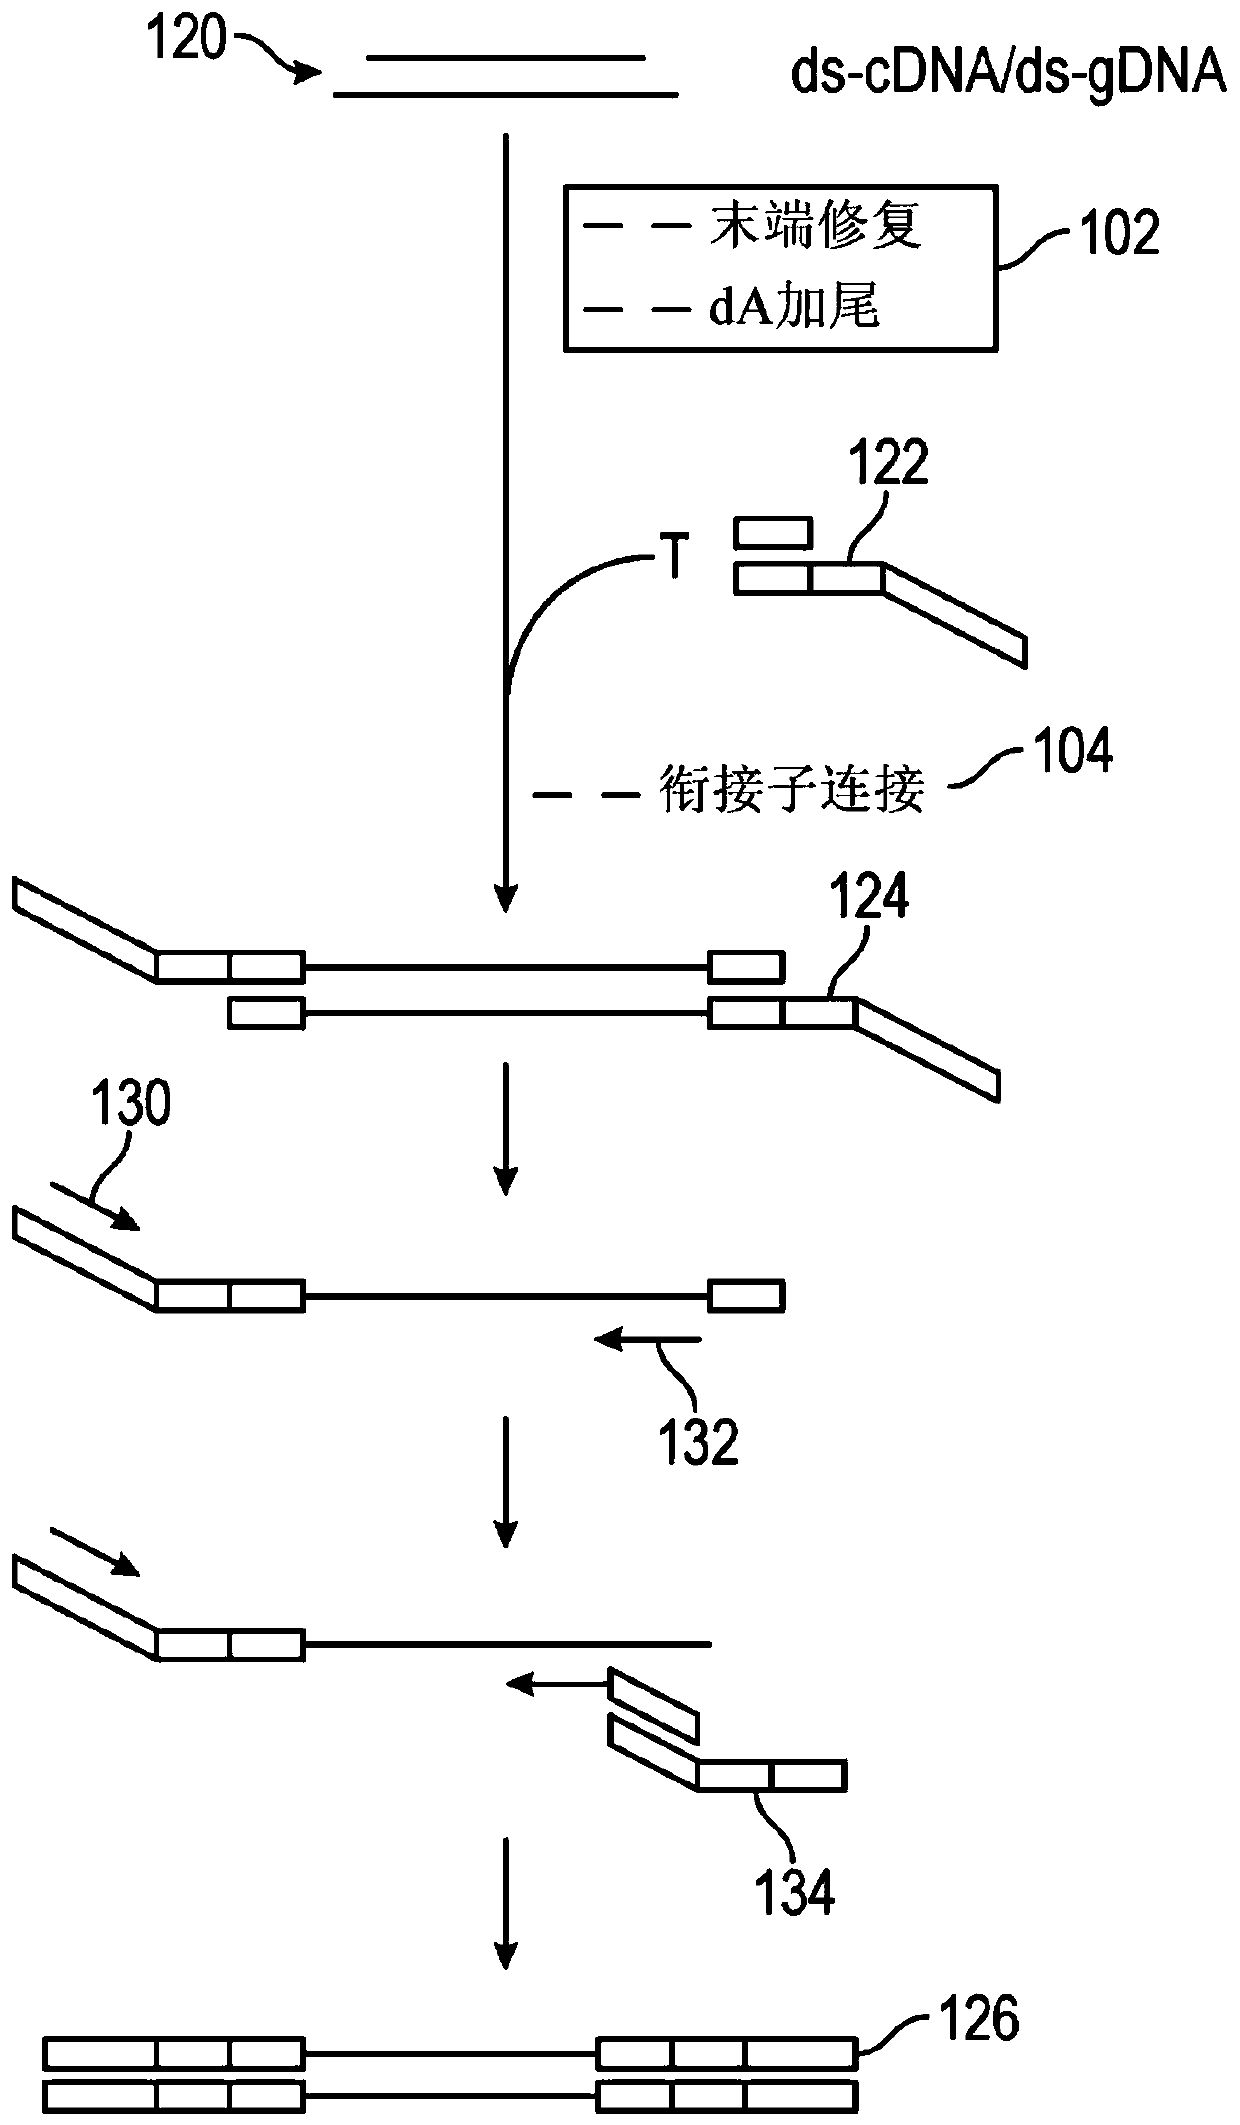 Fluidic system and related methods